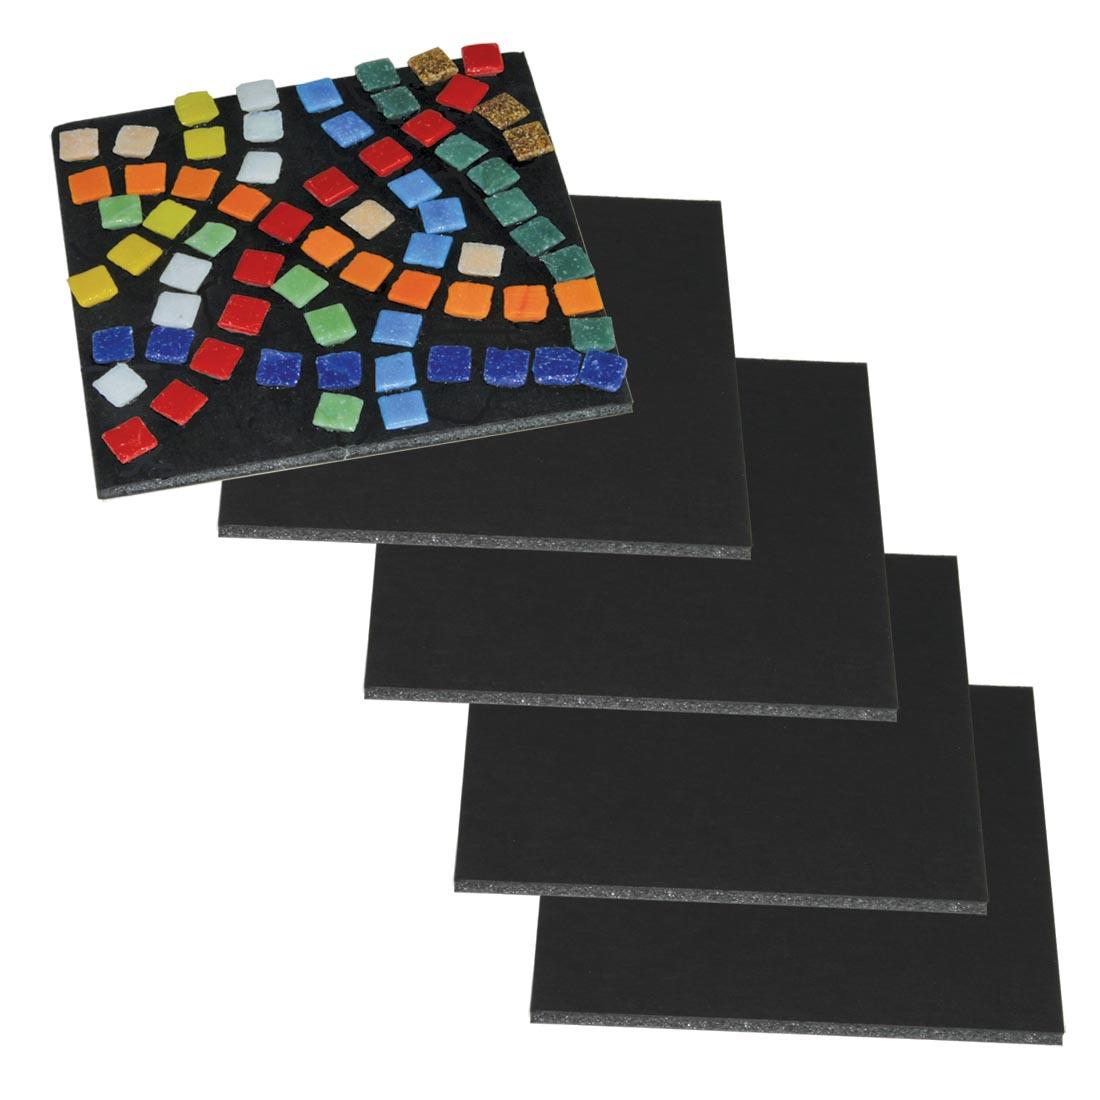 Five Black Flipside Foam Board 5x5" Sheets, one with a mosaic tile craft on top